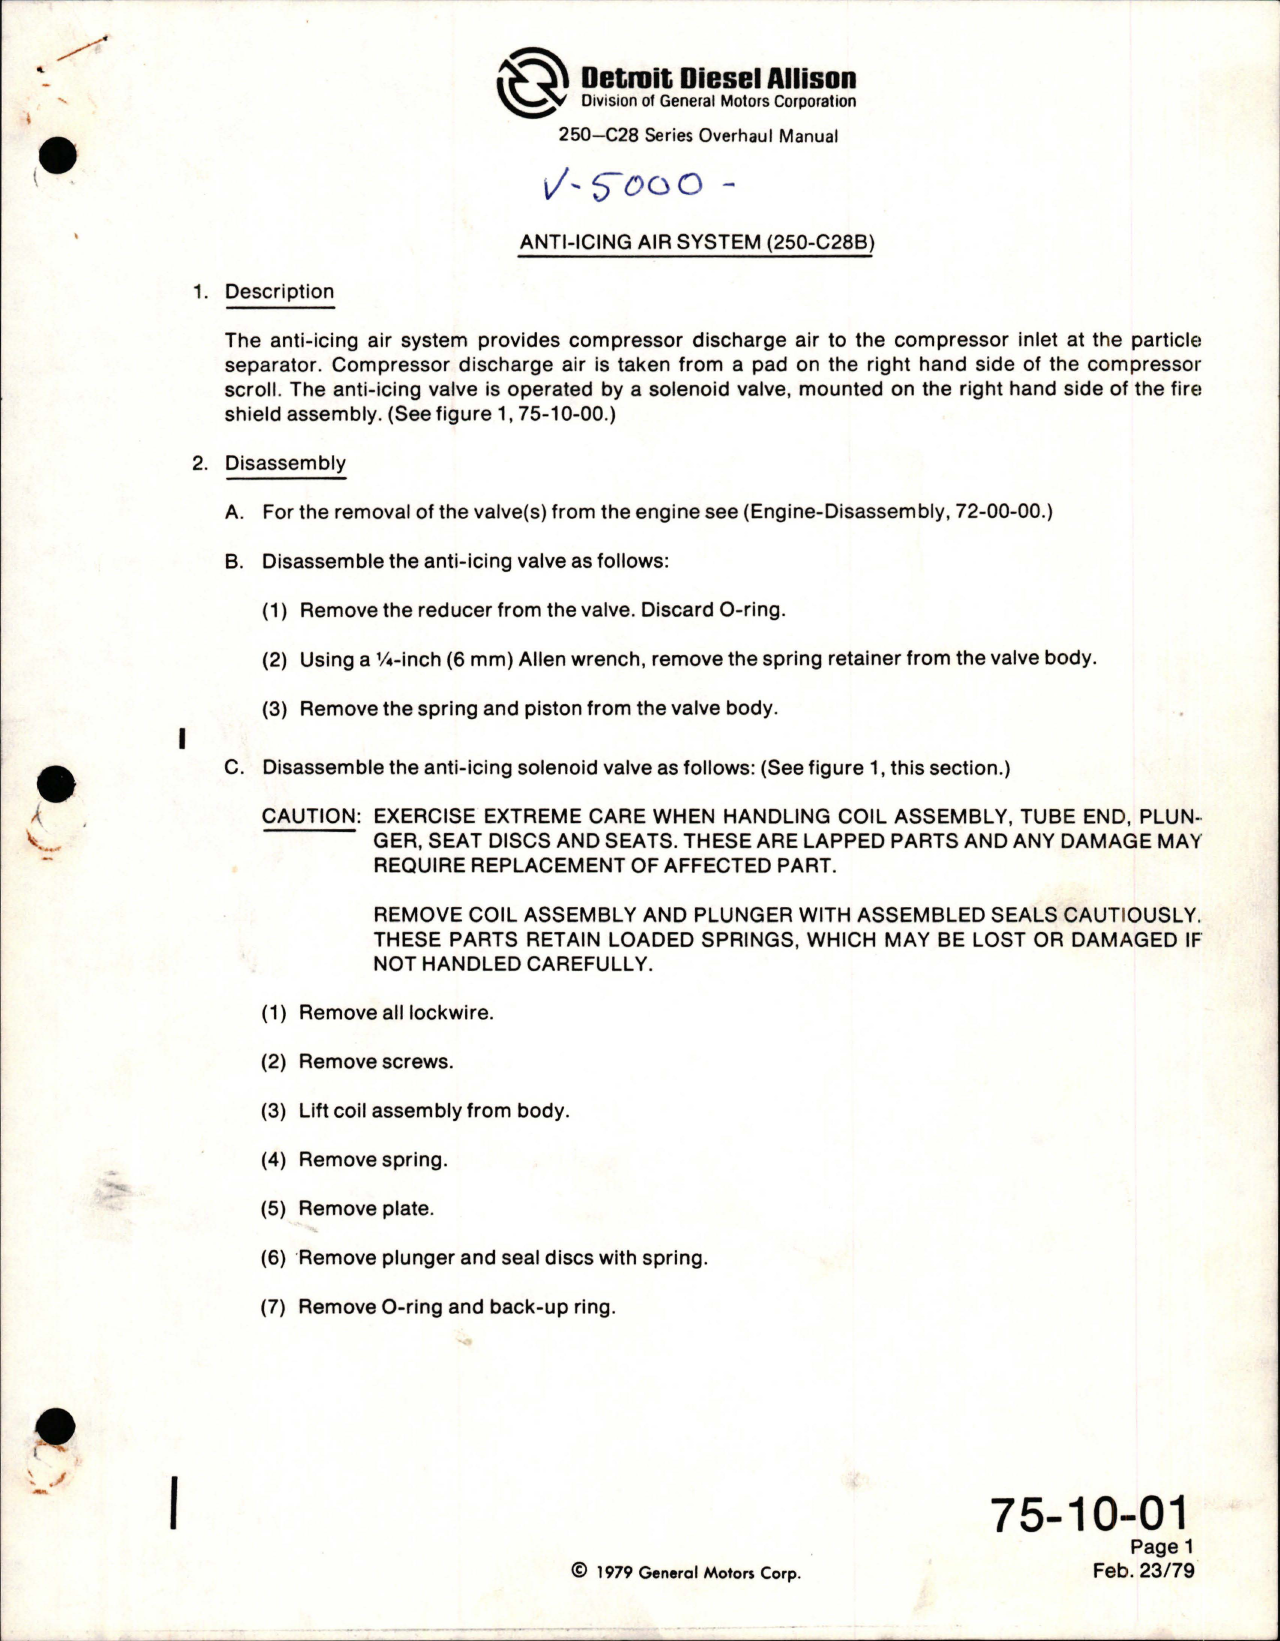 Sample page 1 from AirCorps Library document: Overhaul Manual for Anti-Icing Air System - 250-C28B Series 